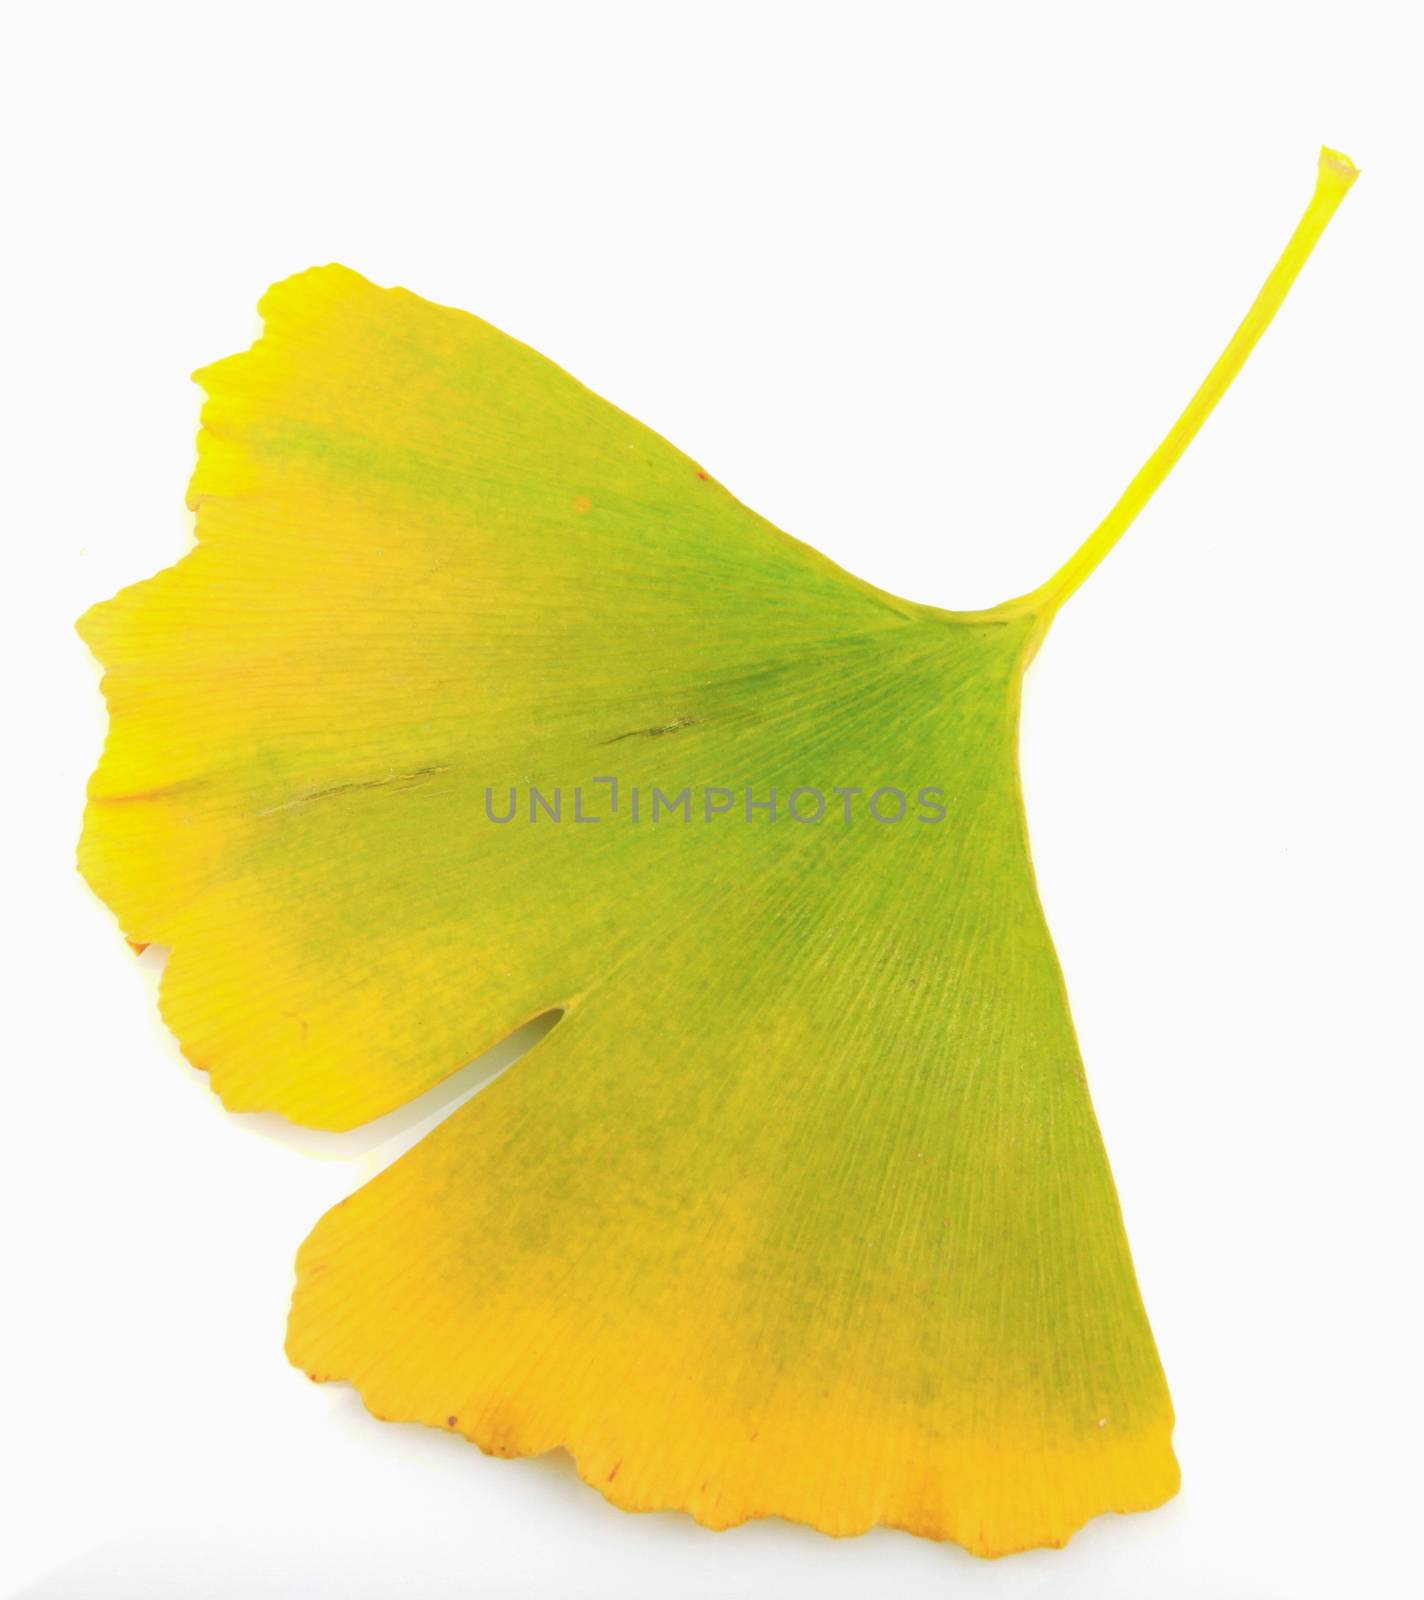 Ginkgo leaf isolated on white background. by nenovbrothers